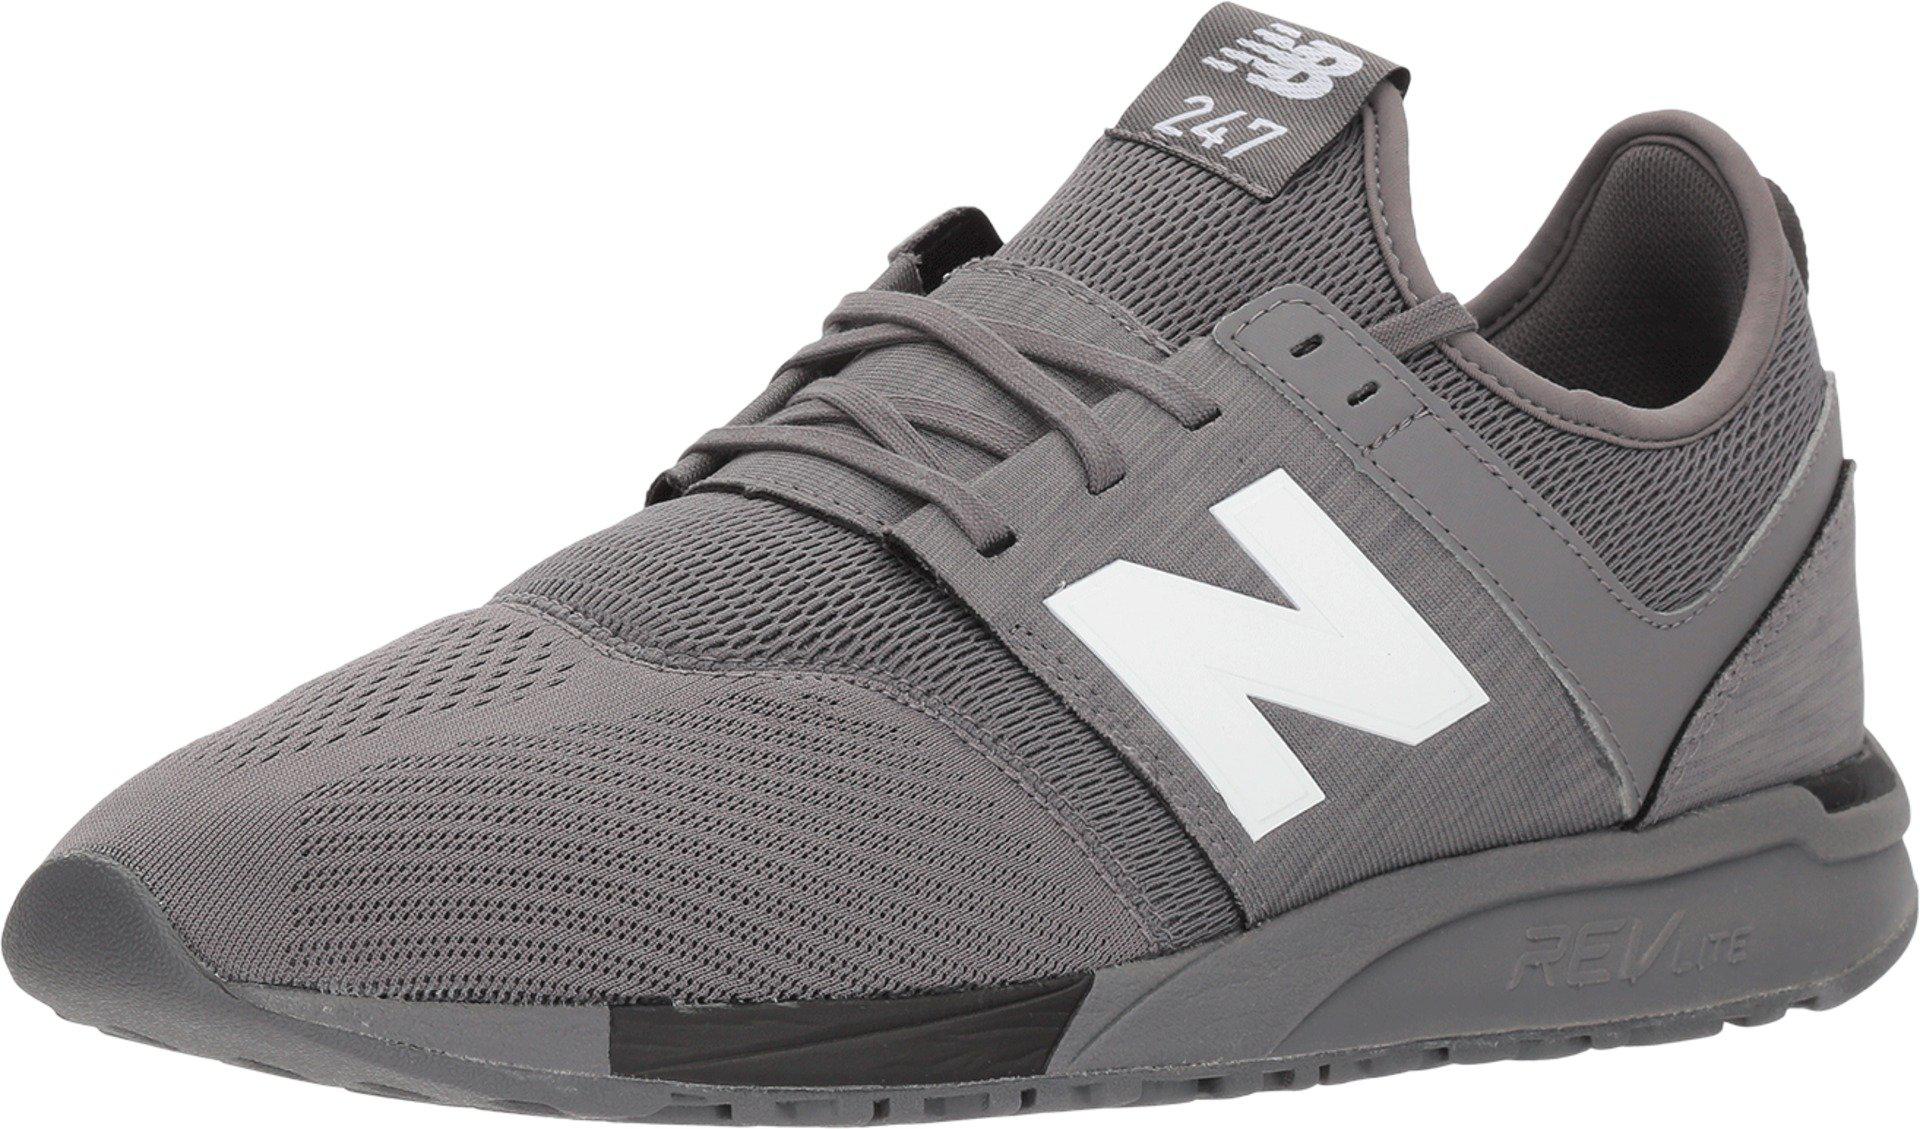 New Balance Synthetic Mrl247v1 in Grey 